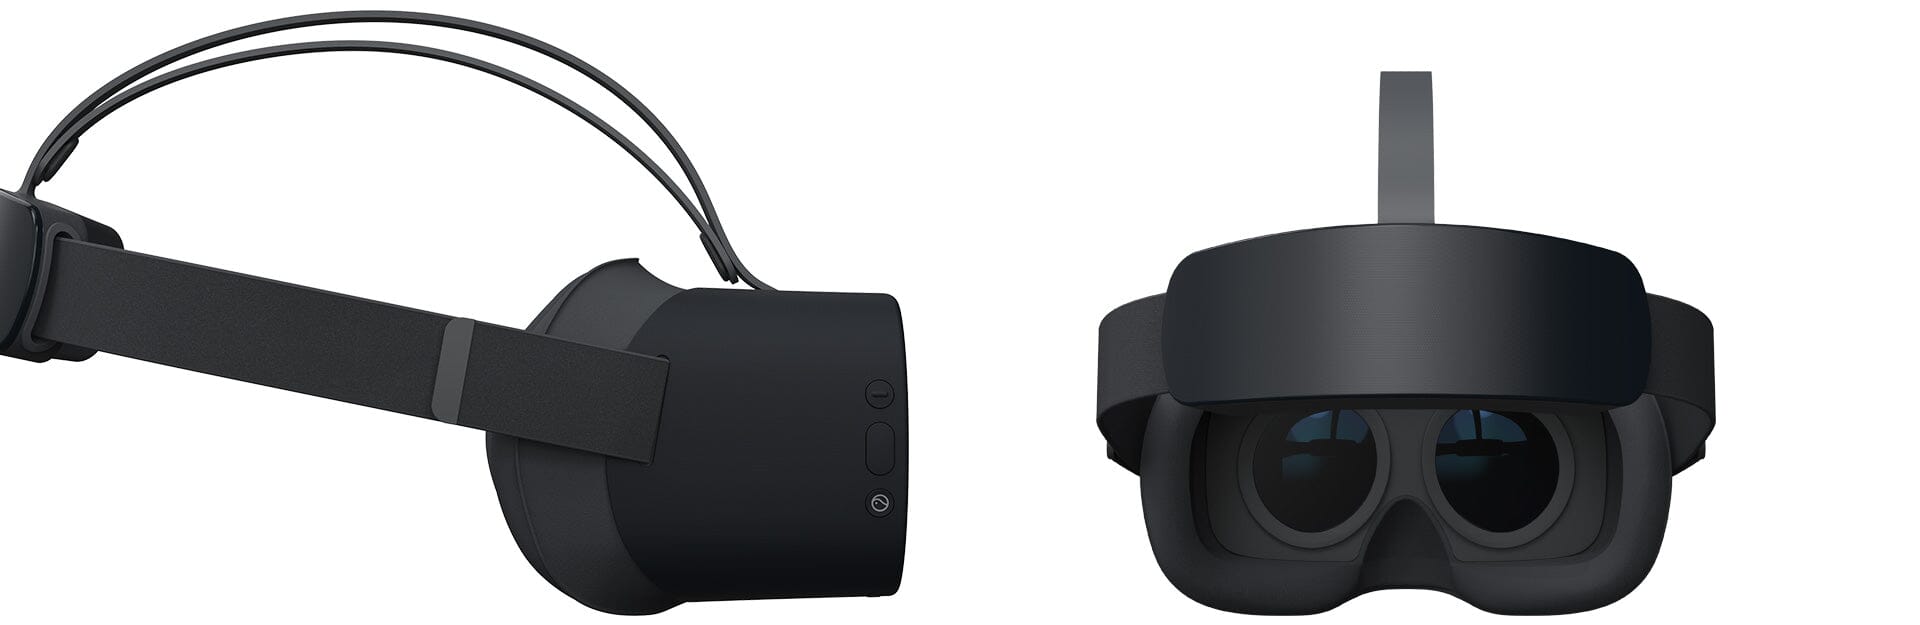 Custom Pico G2 4K All-in-One VR Headset Available | Nibiru OS